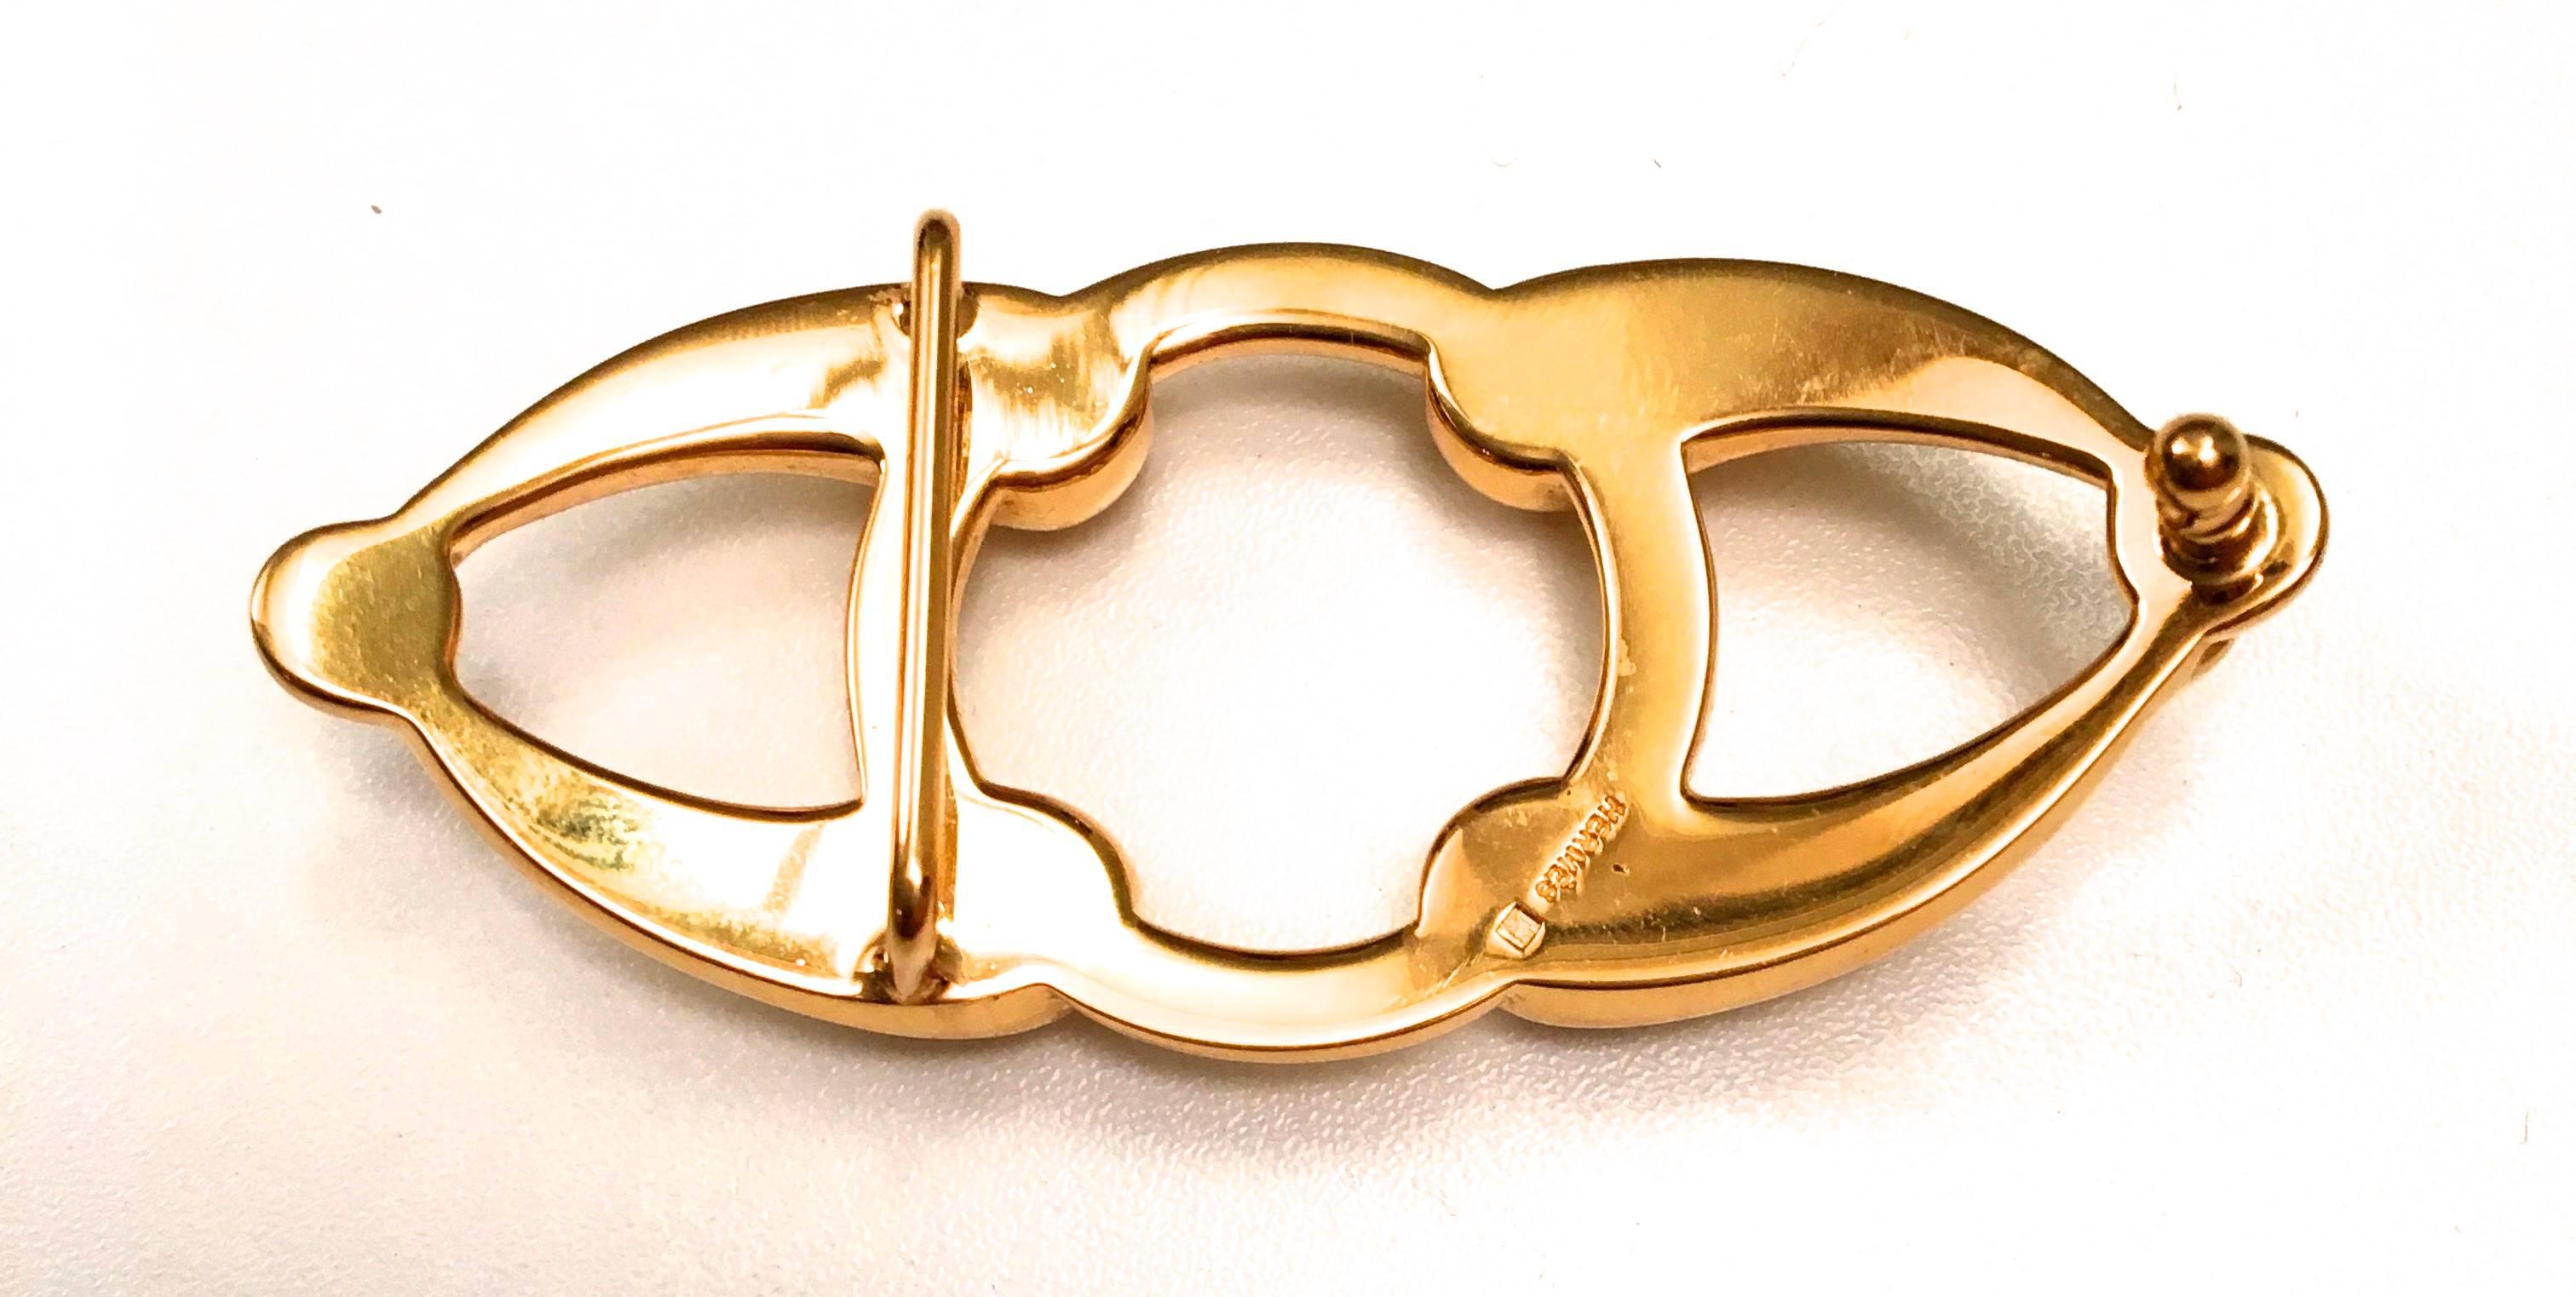 Presented here is a rare gold tone buckle from Hermes. This beautiful vintage buckle is a vintage design that fits any standard Hermes belt. The buckle has been re-plated and is in near mint condition as if it was newly cast. The buckle measures